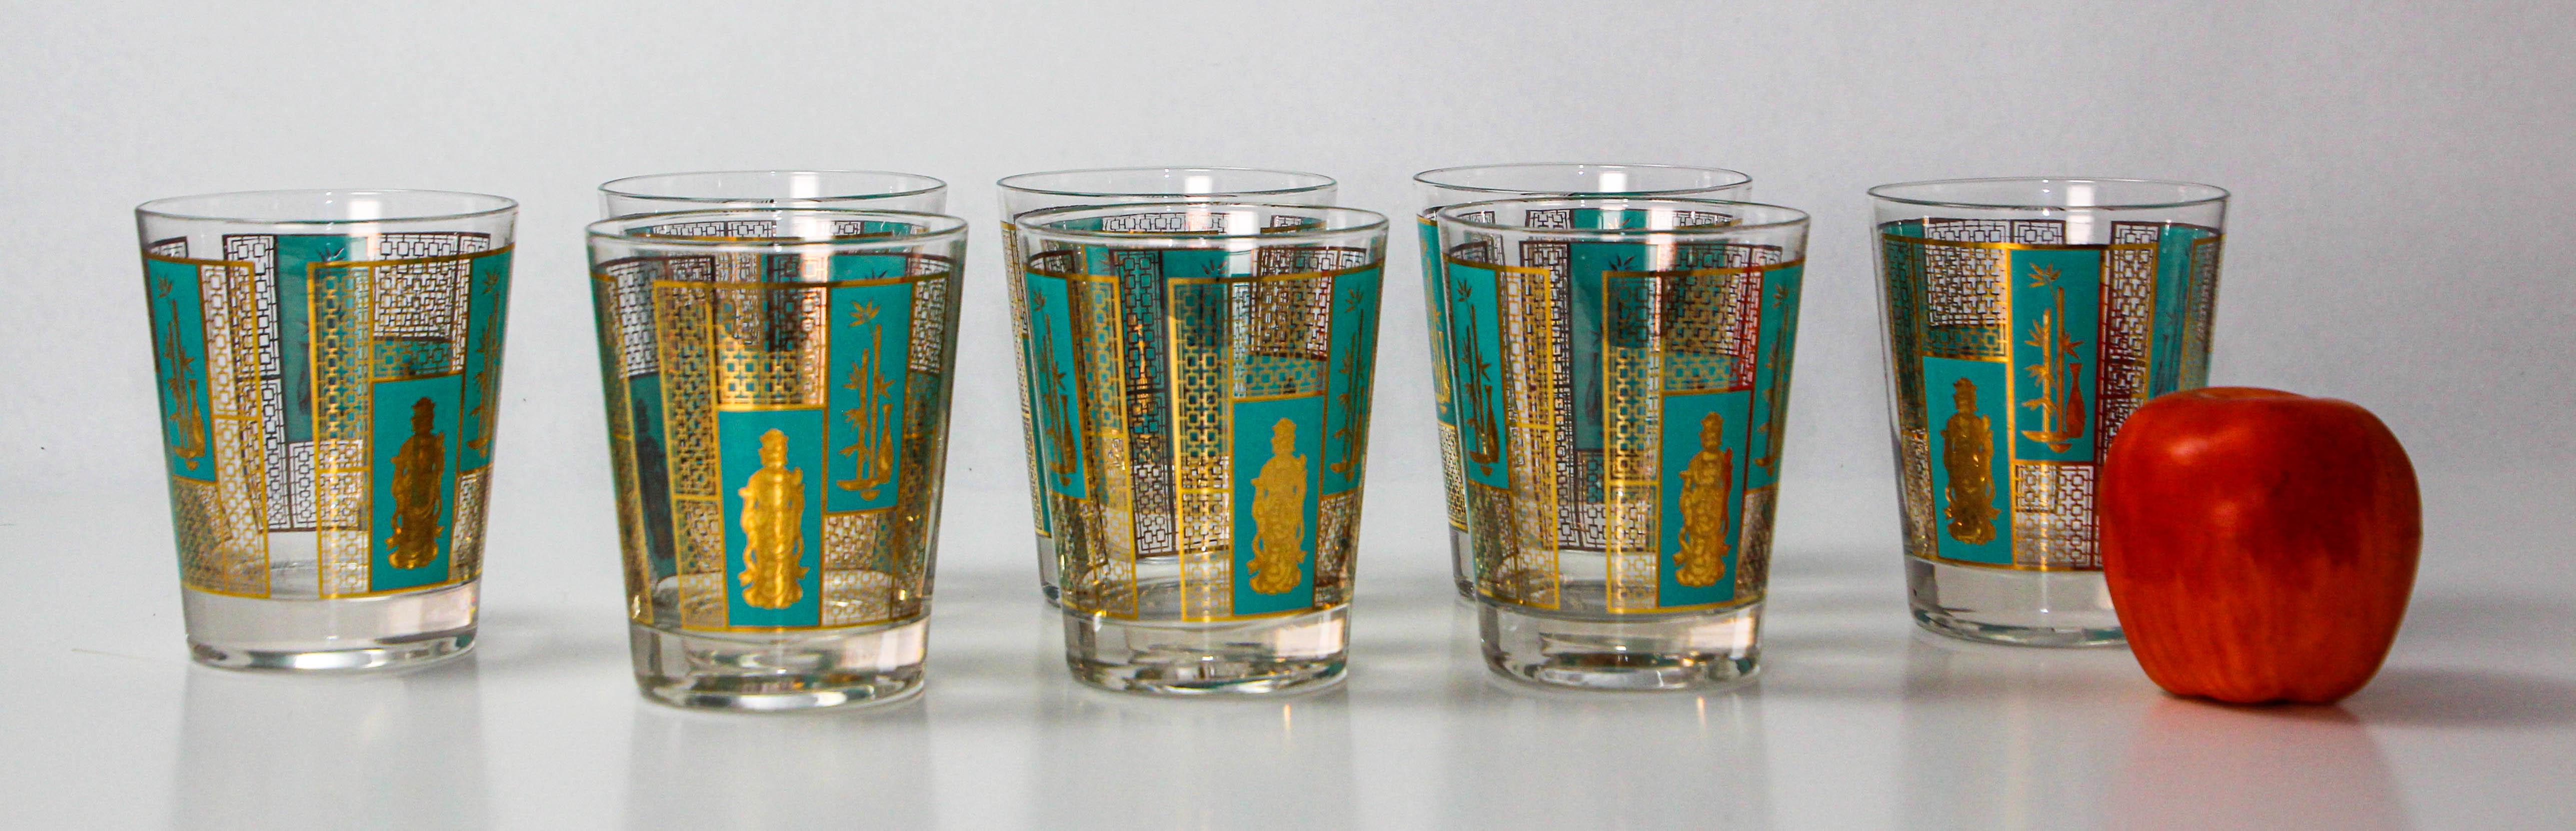 1960s Mid-Century 22-Karat gold and turquoise Shoji Asian Style Cocktail Glasses attributed to Georges Briard.
Mid-Century 22-Karat gold and blue Chinoiserie style whiskey glasses Set of 8.
This gorgeous in typical Hollywood Regency 1950s 60s design